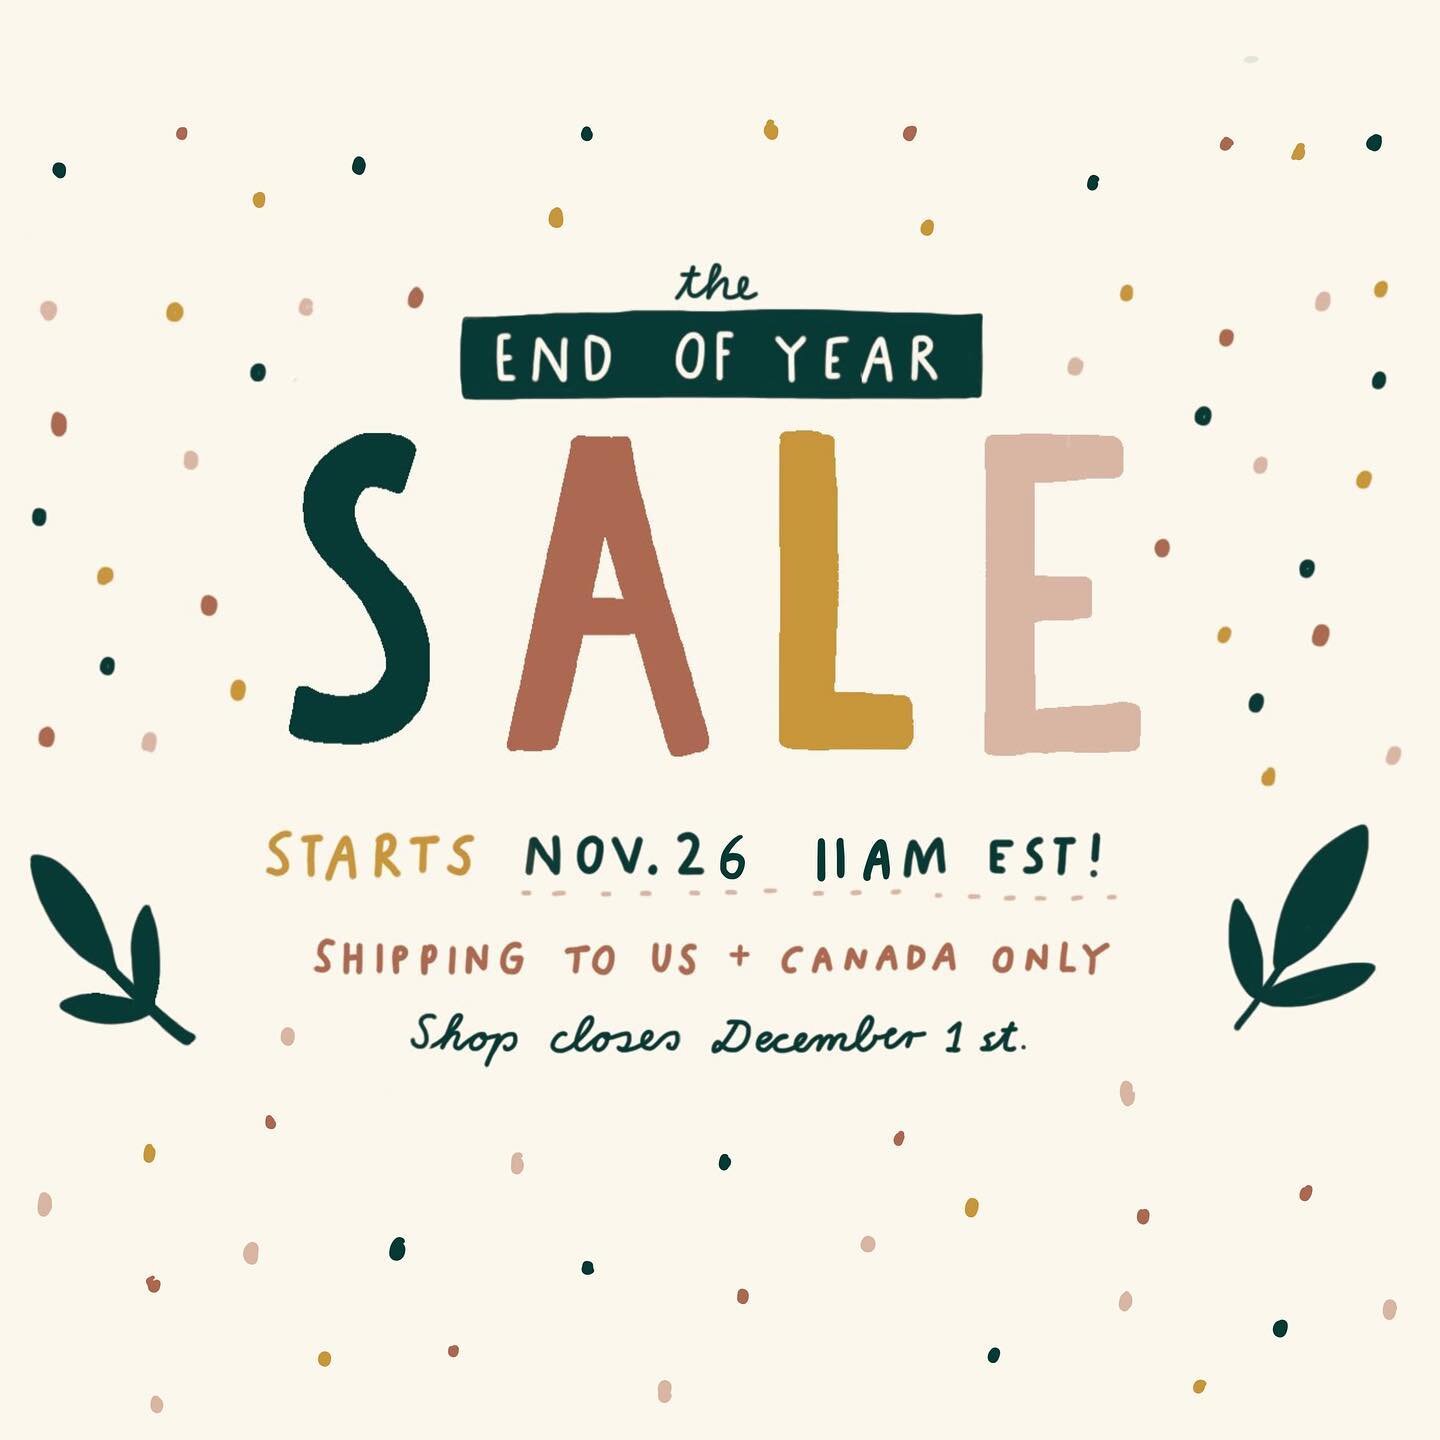 END OF YEAR SALE is live now!!!!
Hey! @mikelowerystudio and I are bringing to you the end of the year sale. All prints are $15 and availability is limited. If you had your eyes on a print&hellip; now is the time to get it. Some of the prints are leav